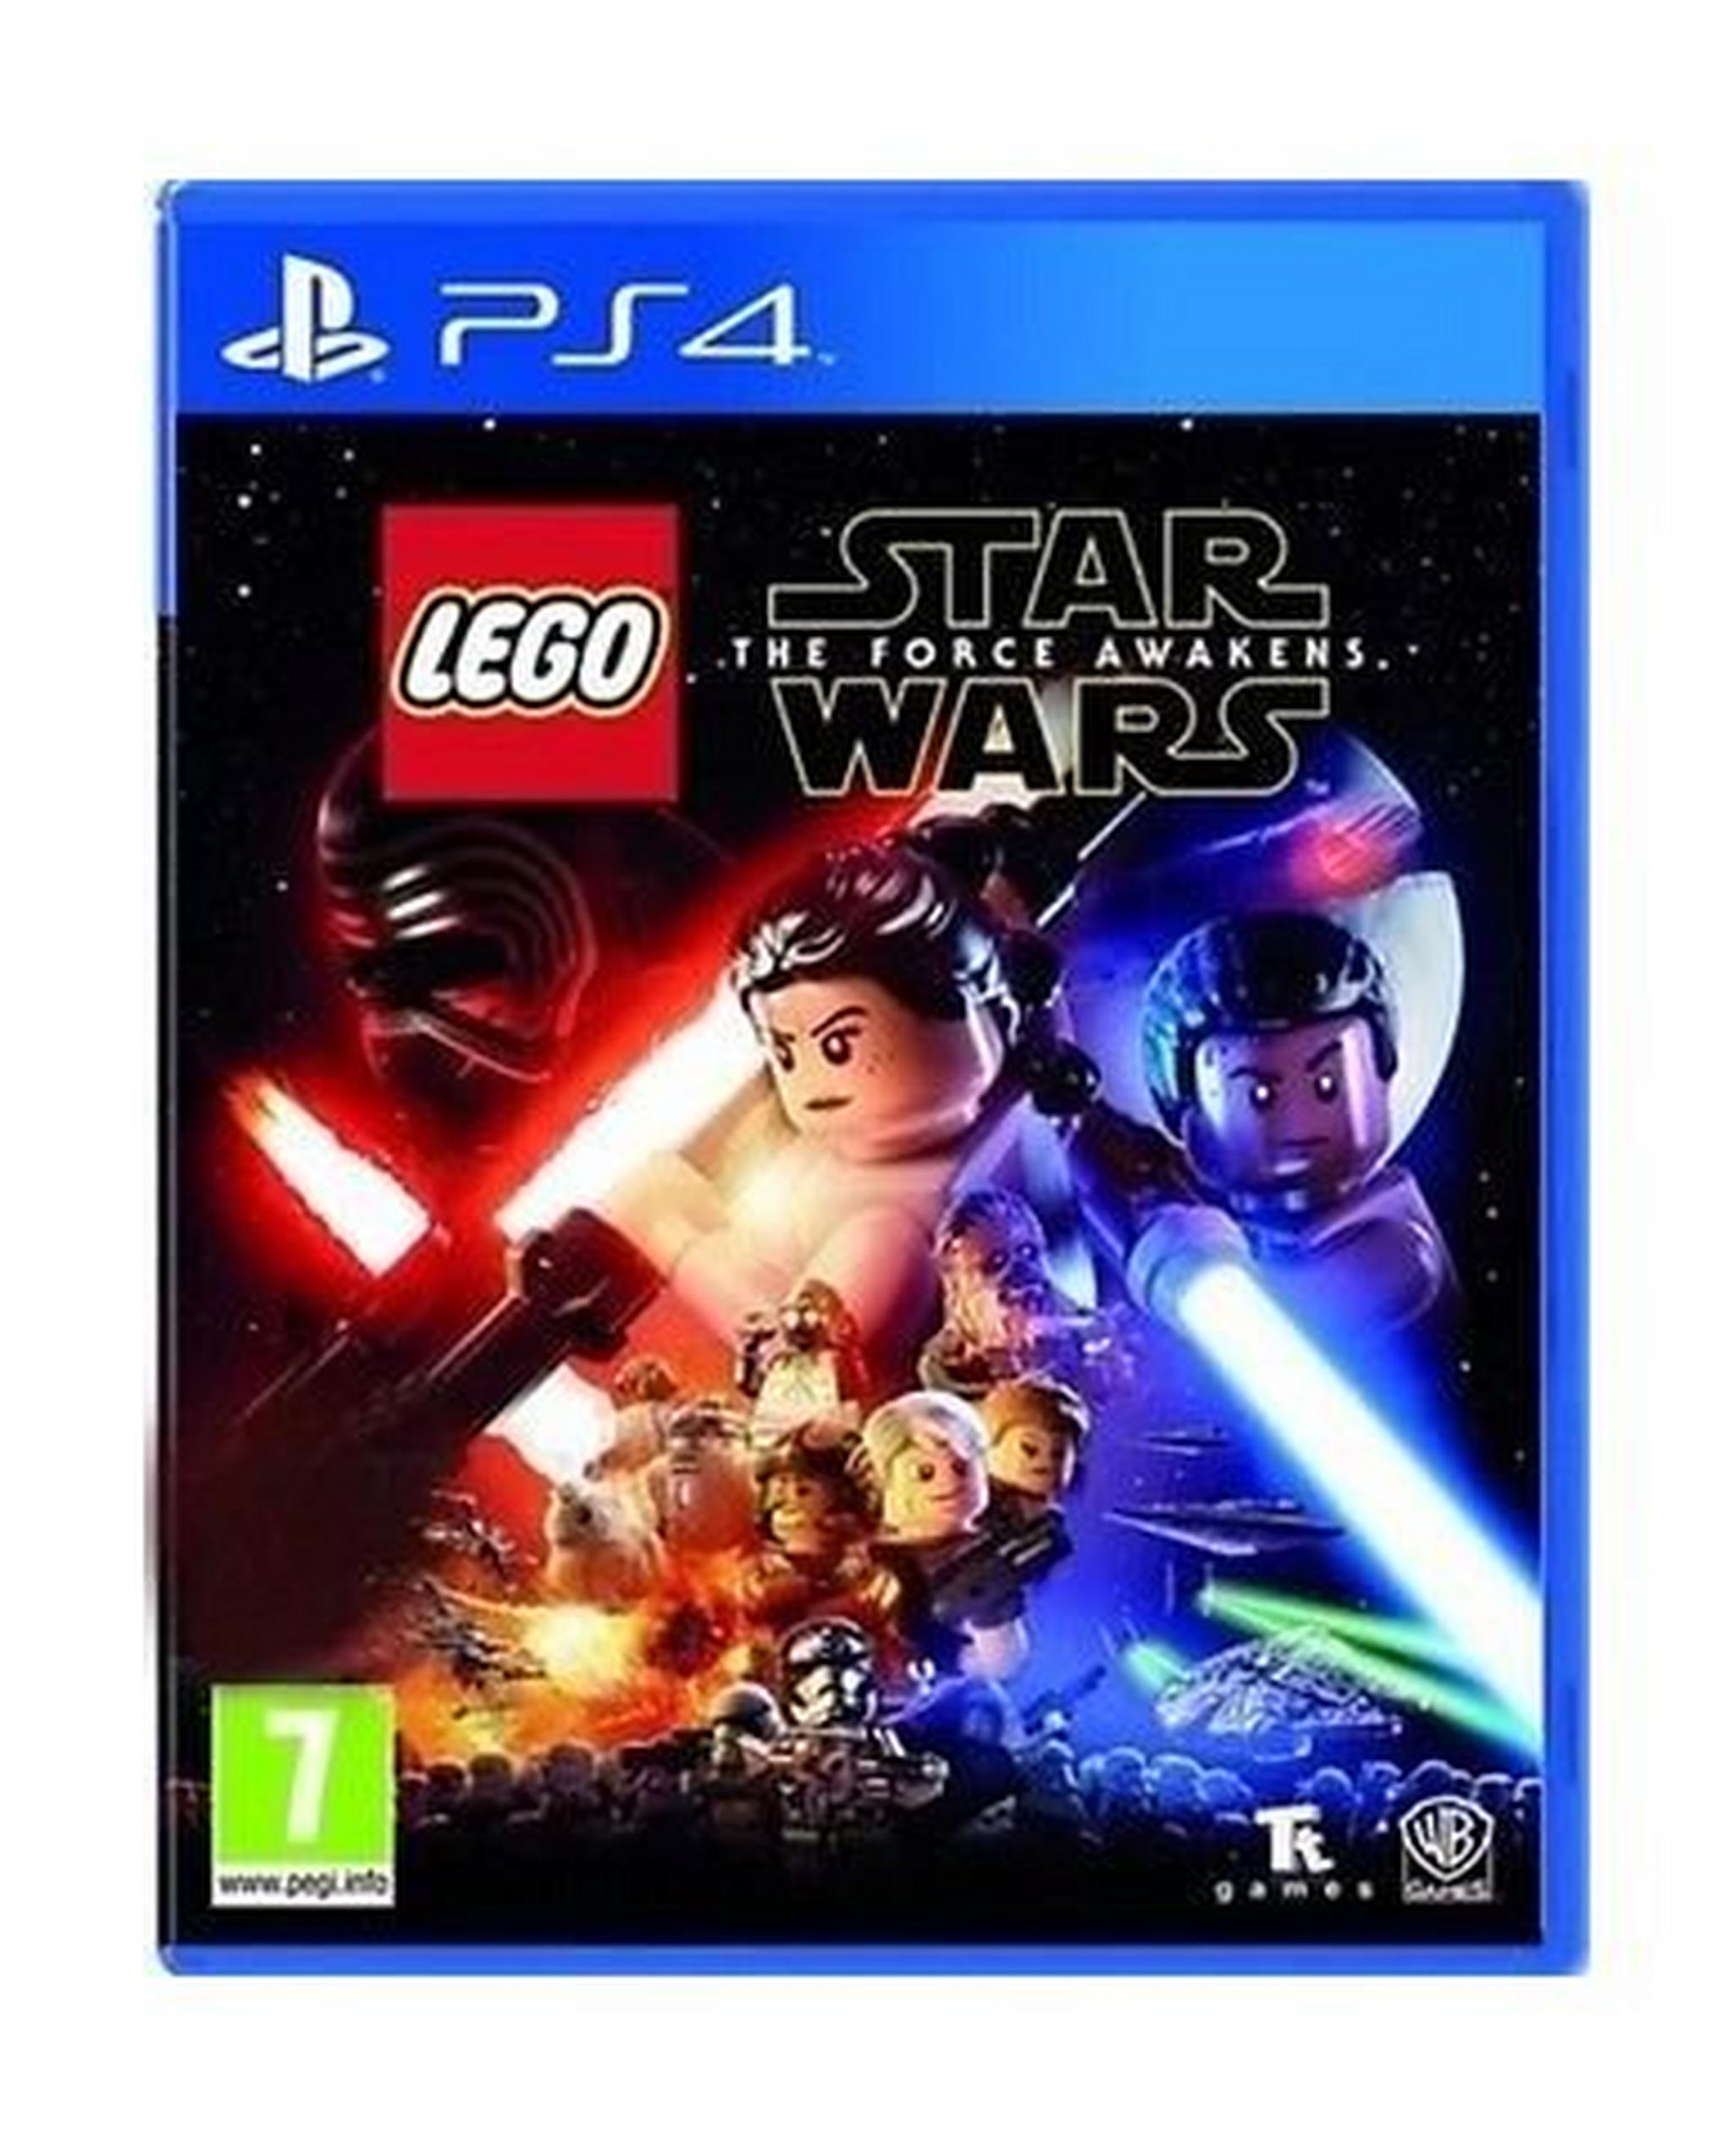 Lego Star Wars: The Force Awakens – Playstation 4 Game